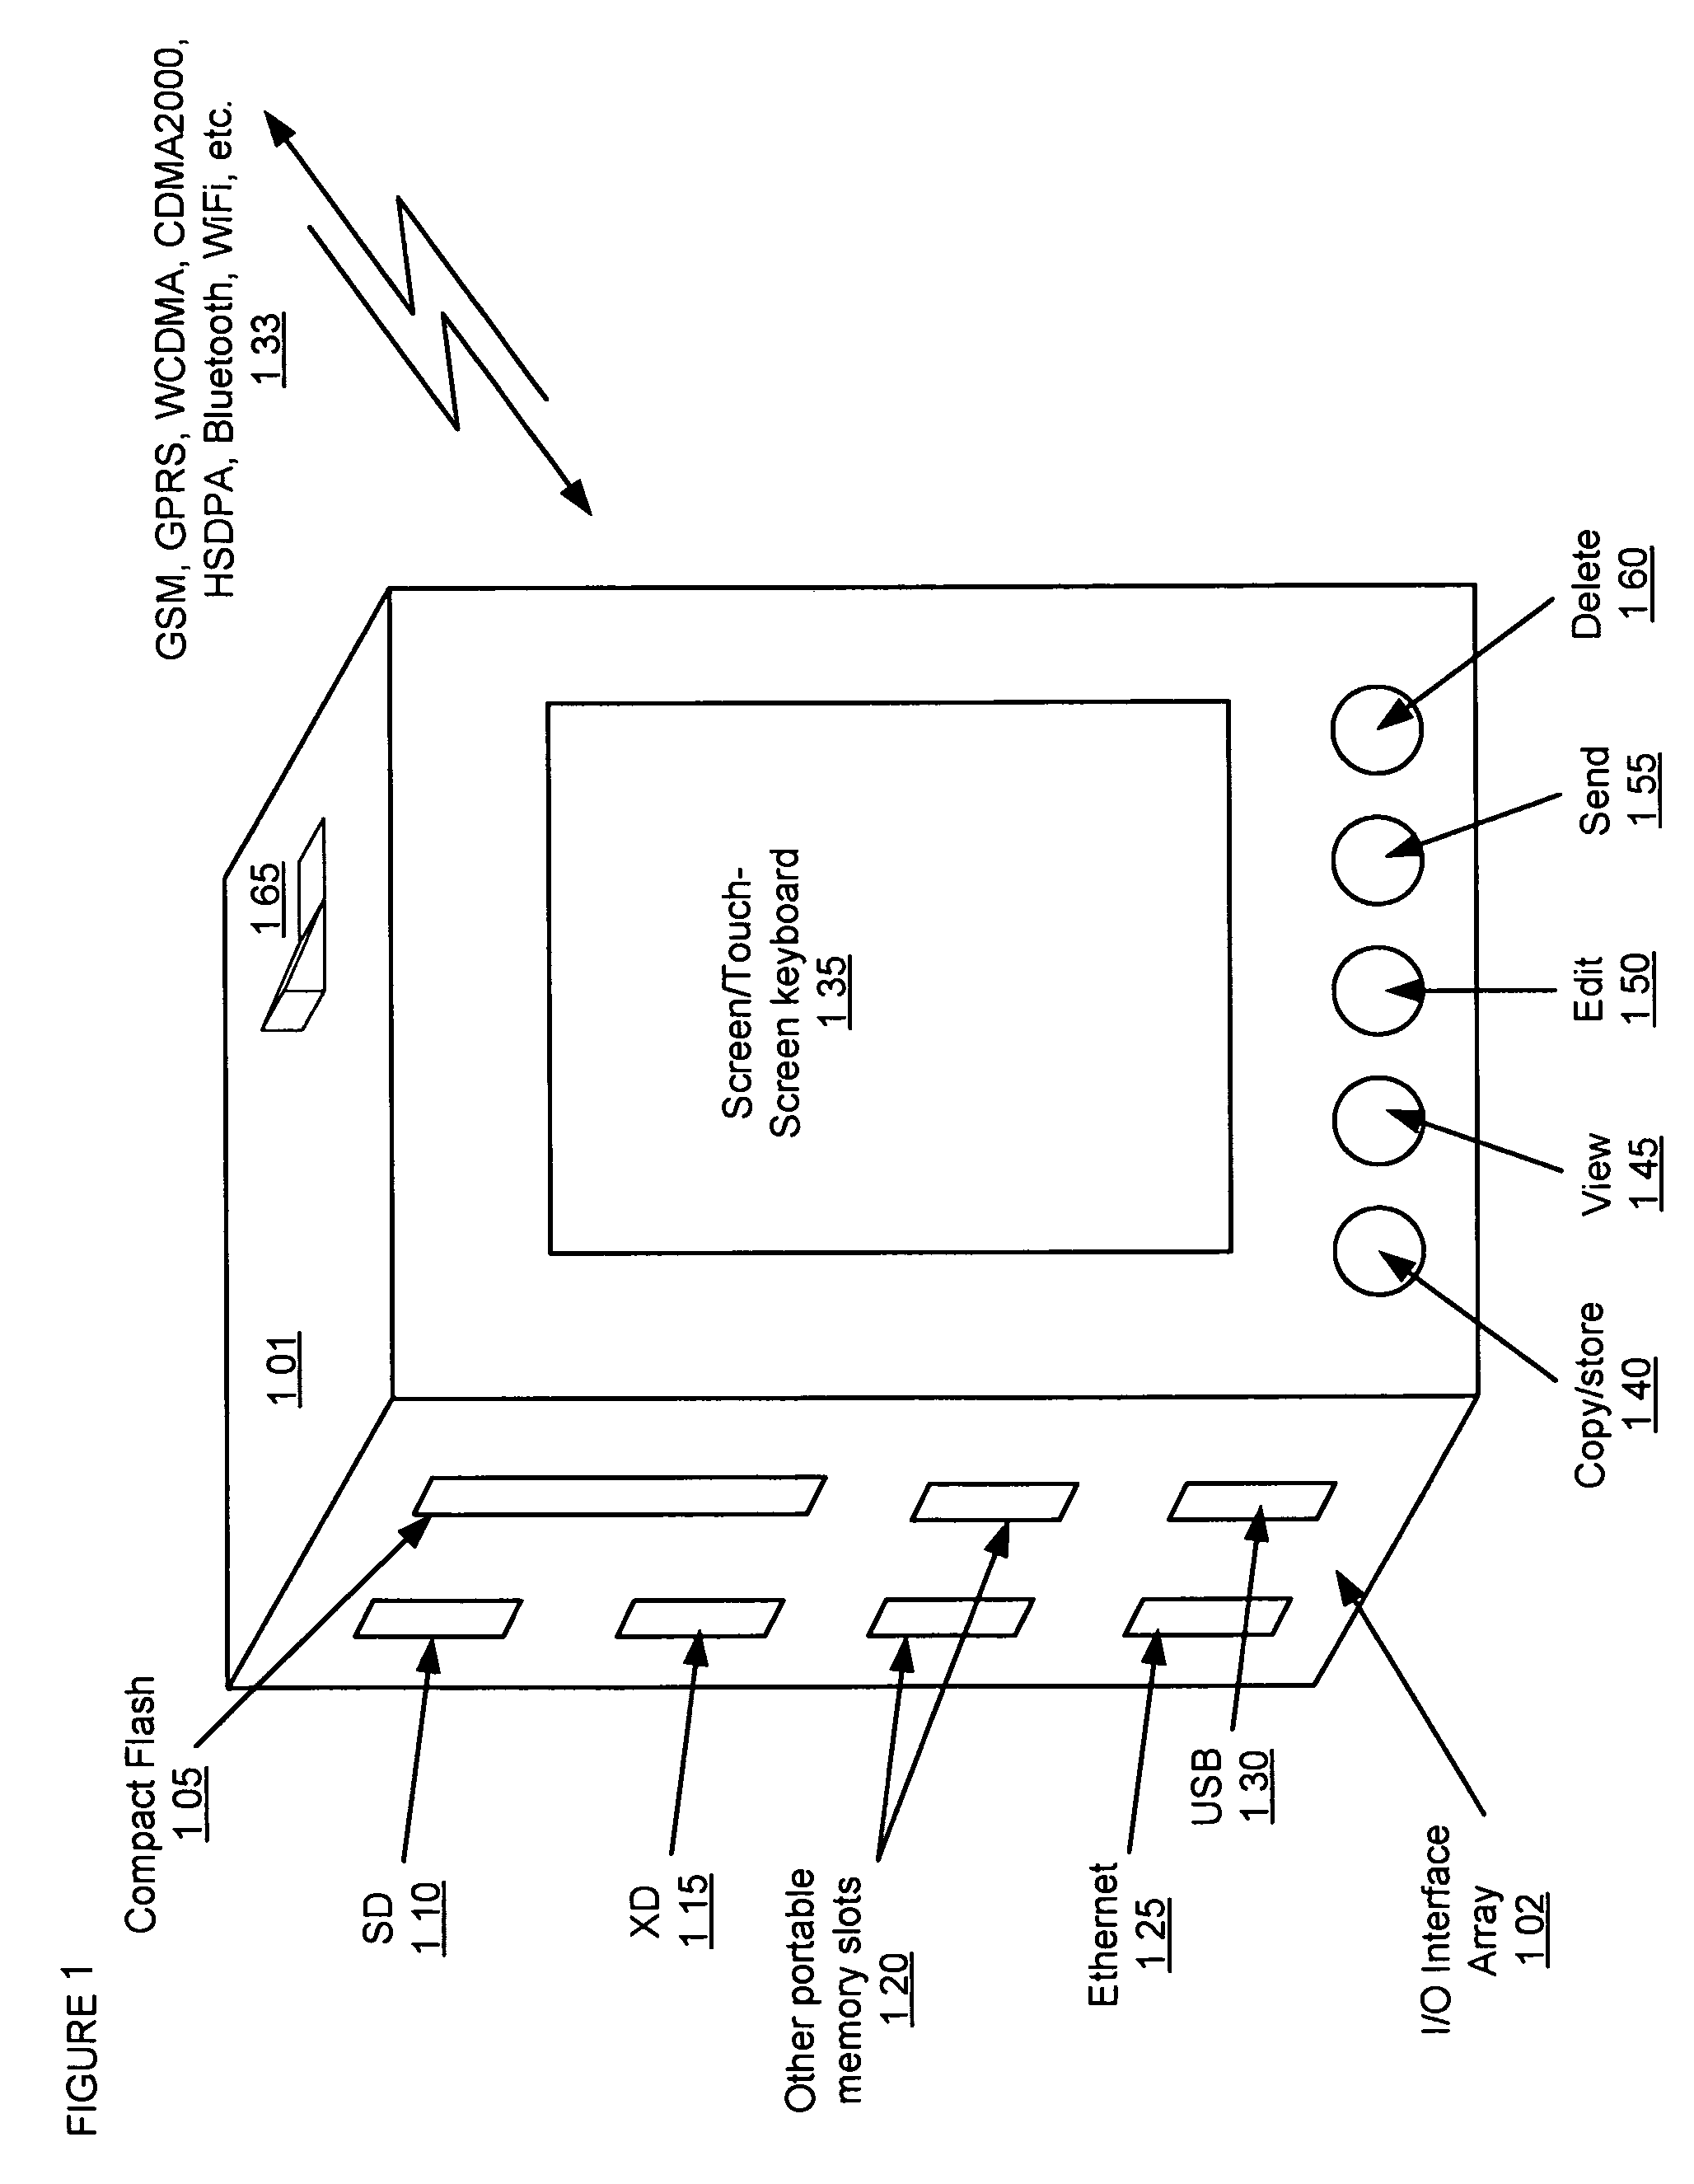 User interface for a portable, image-processing transmitter